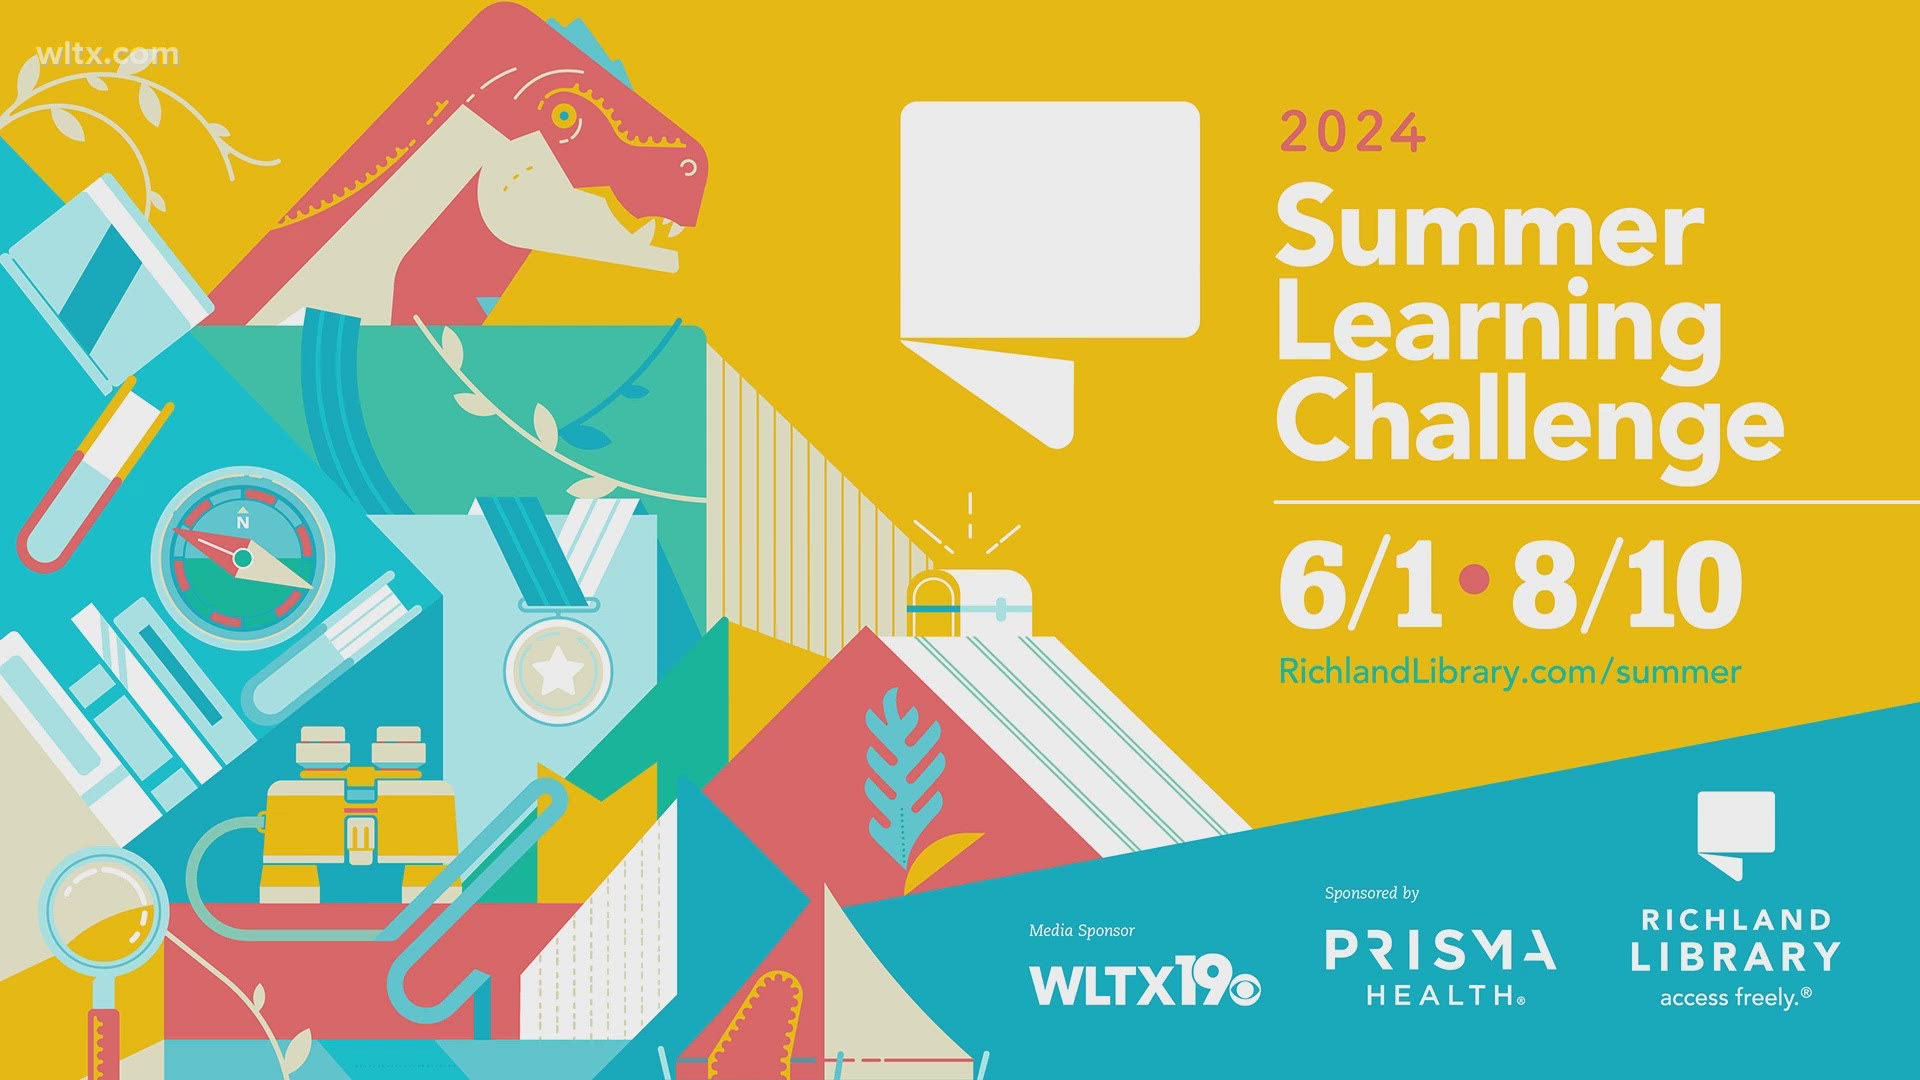 Richland Library has started its 2024 Summer Learning Challenge, which allows children, teens, and adults a way to learn and create for the summer.